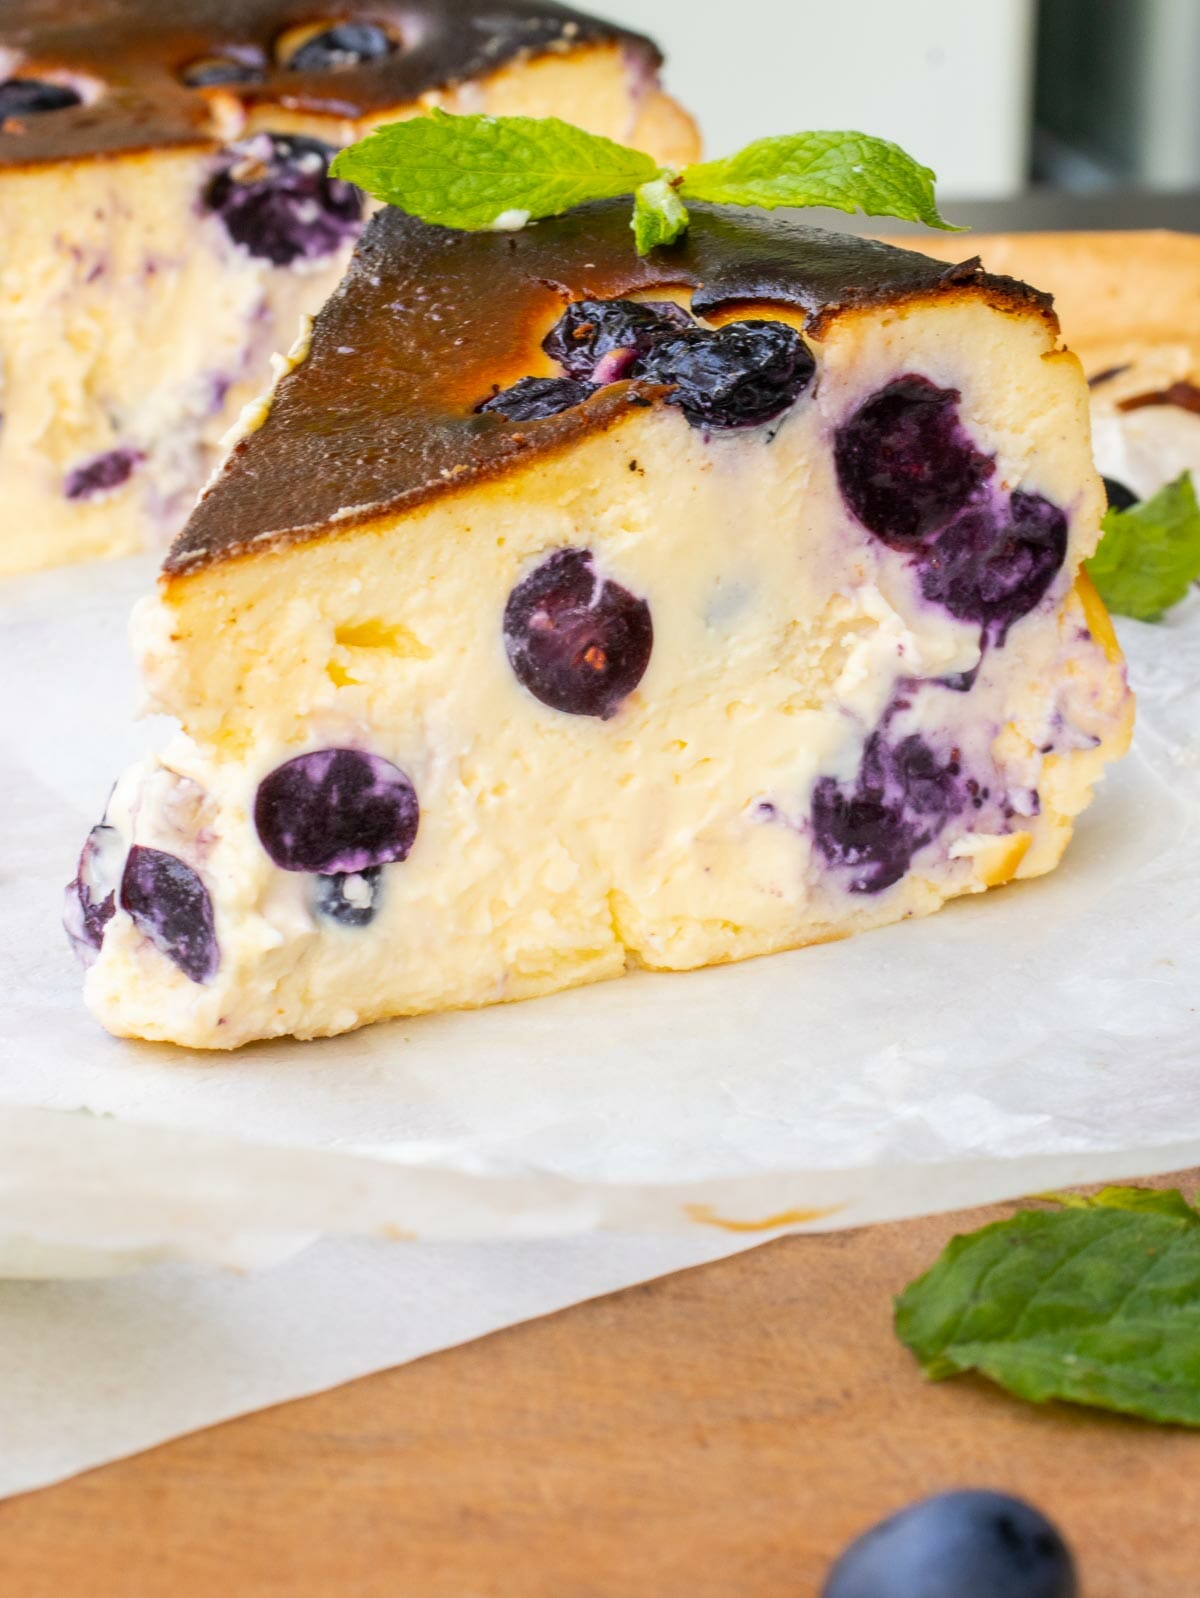 a slice of blueberry cheesecake with caramel top and garnished with mint leaves